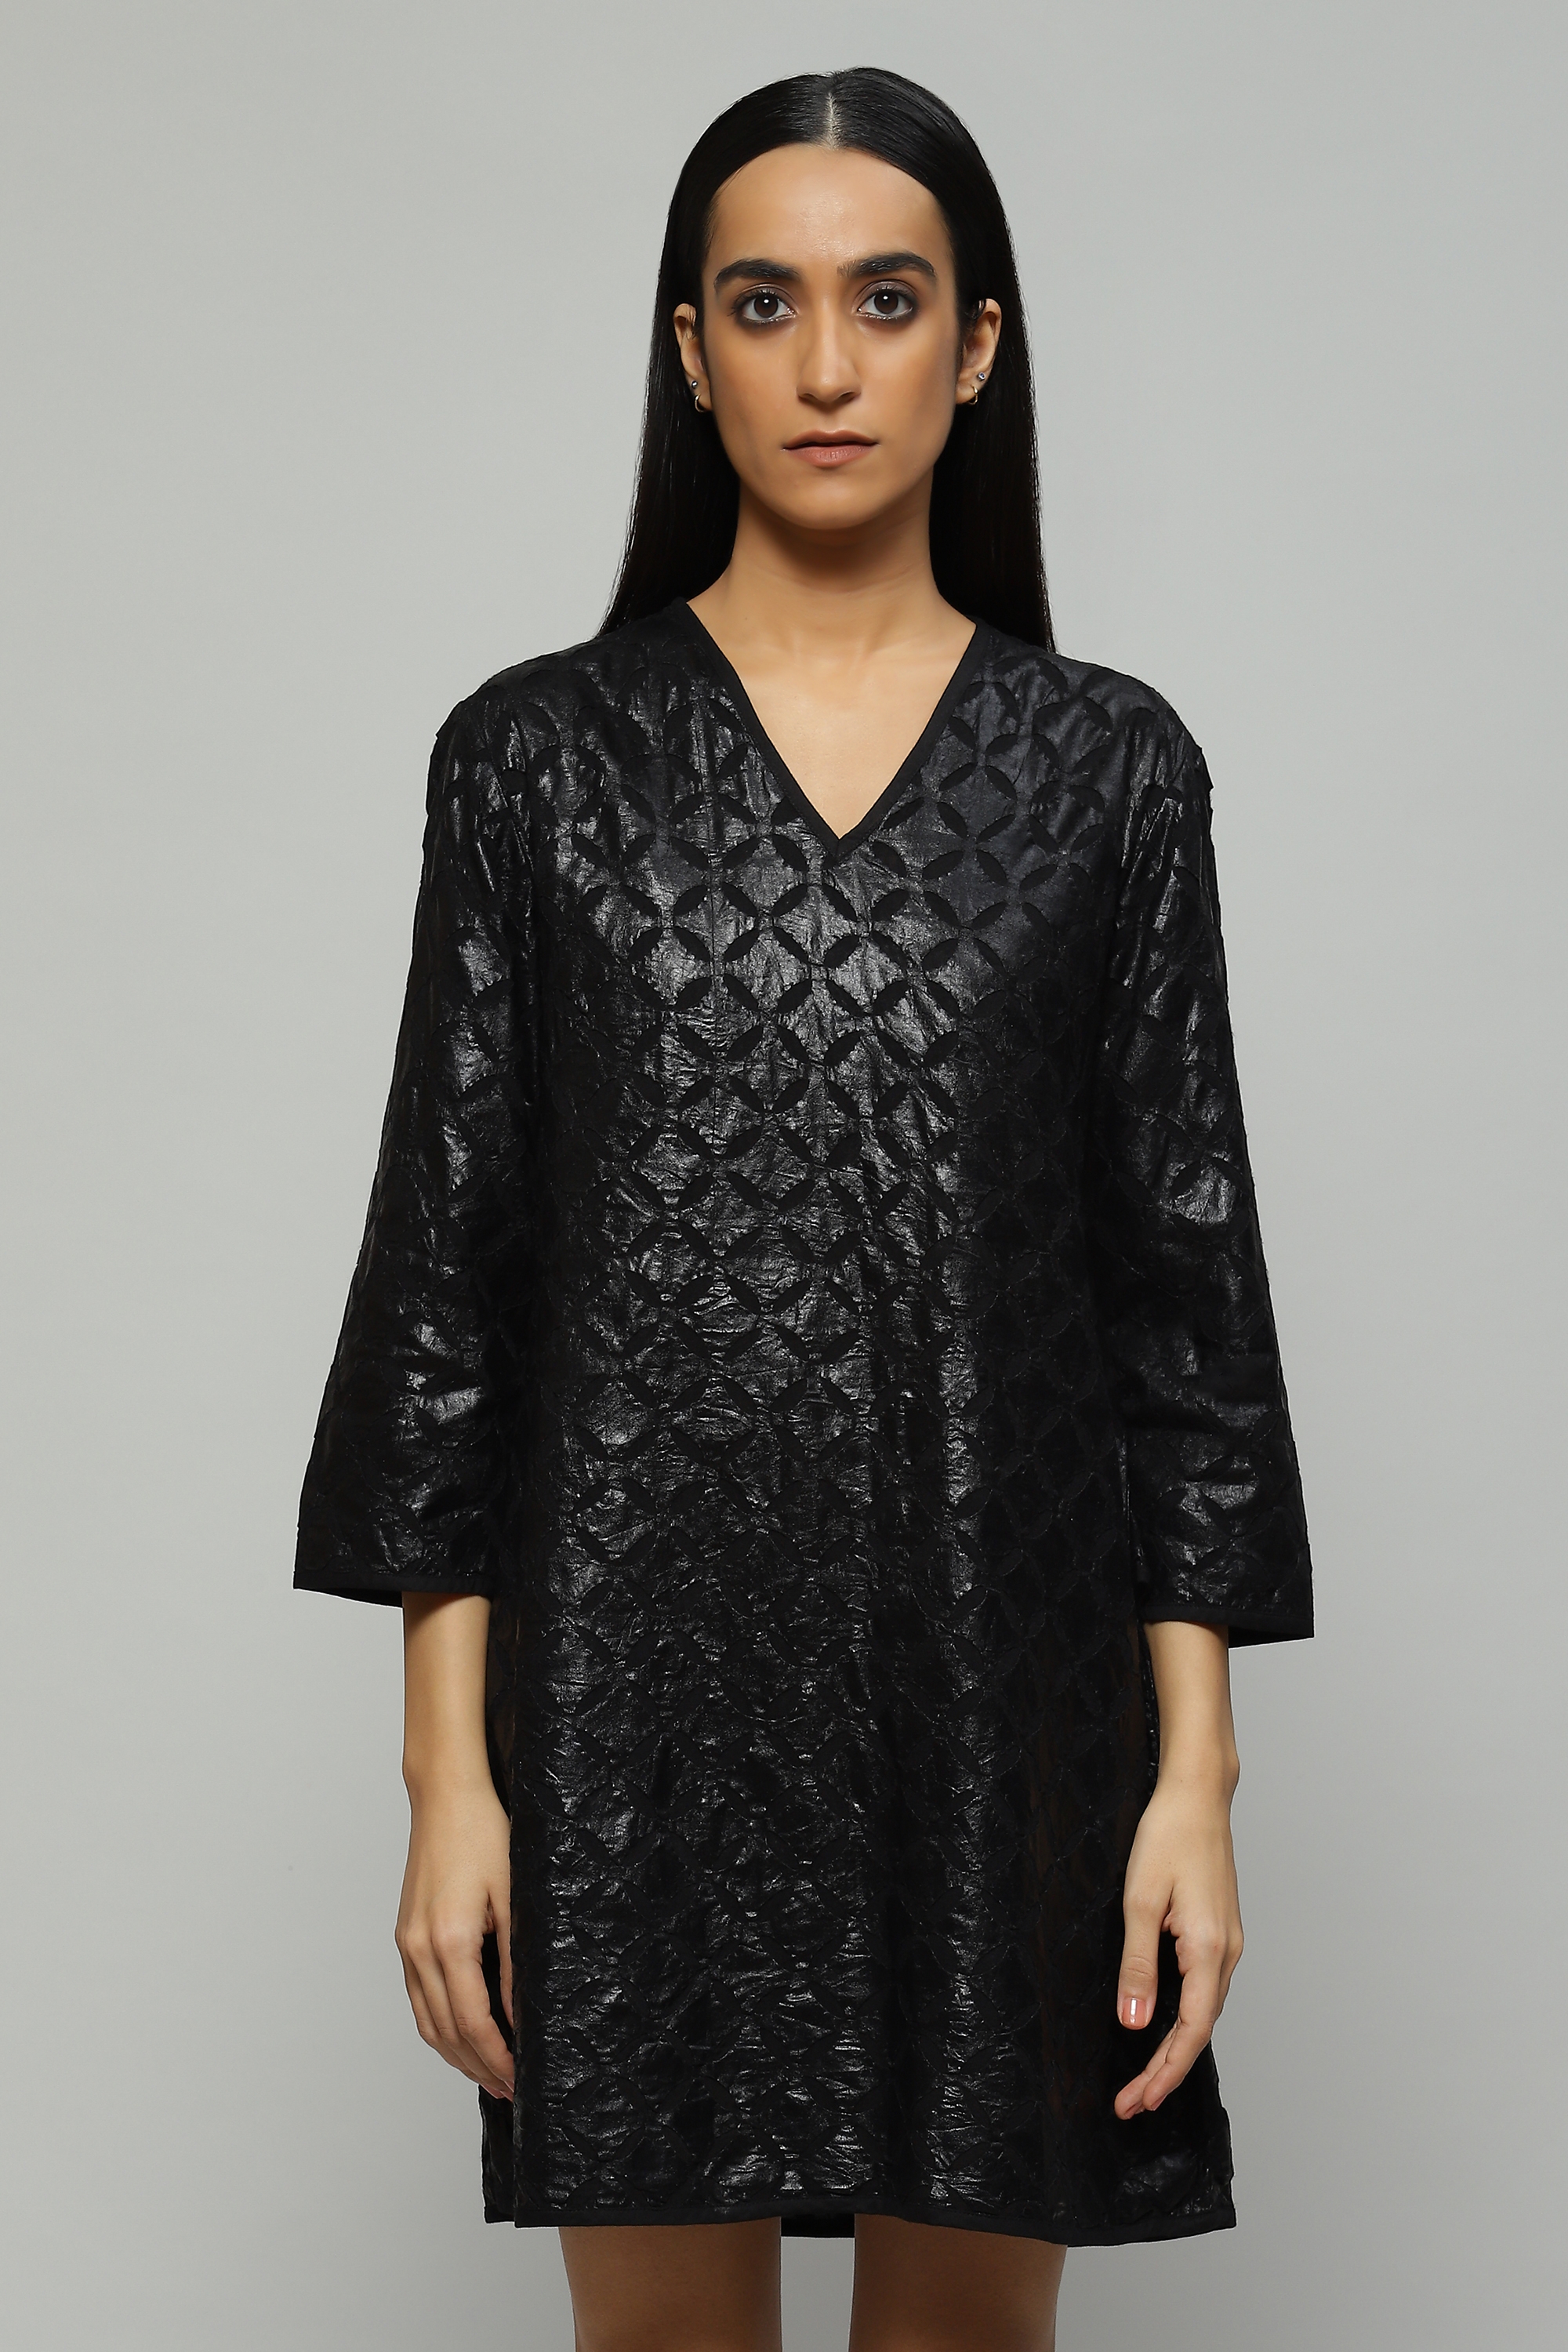 ABRAHAM AND THAKORE | Foil Applique And Cutwork Dress